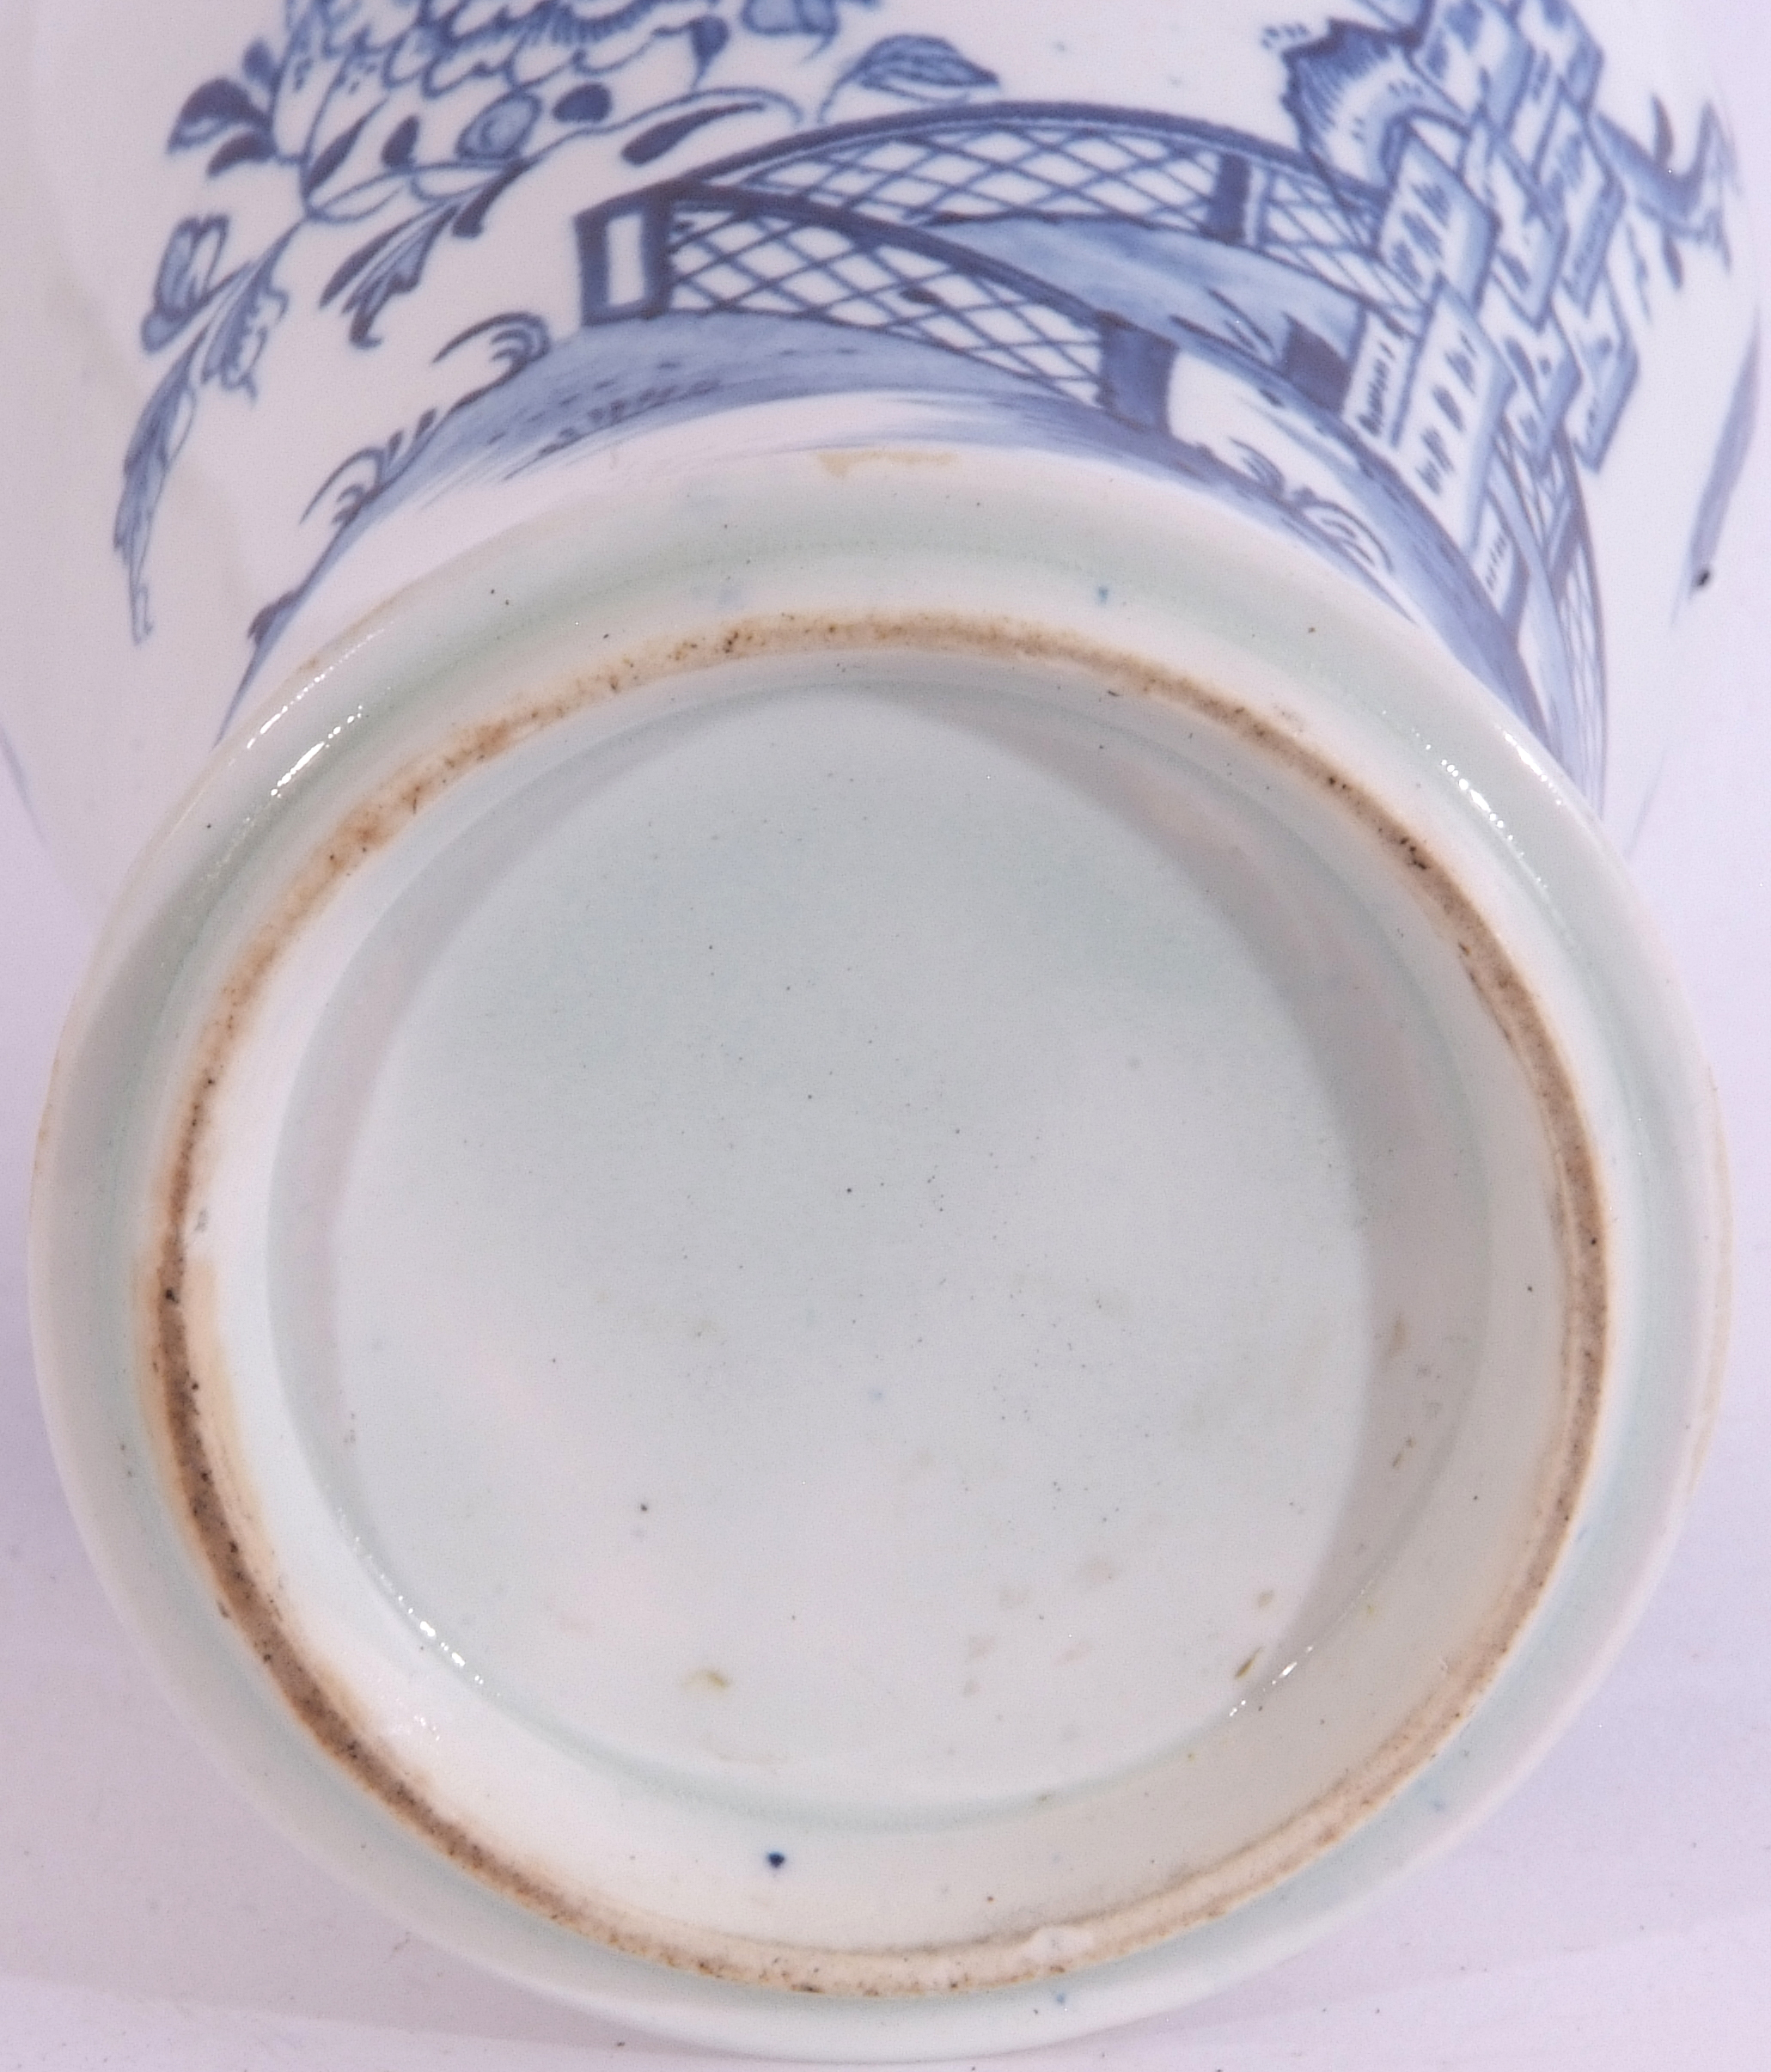 Lowestoft porcelain baluster vase decorated in underglaze blue with a fence and trees and floral - Image 7 of 7